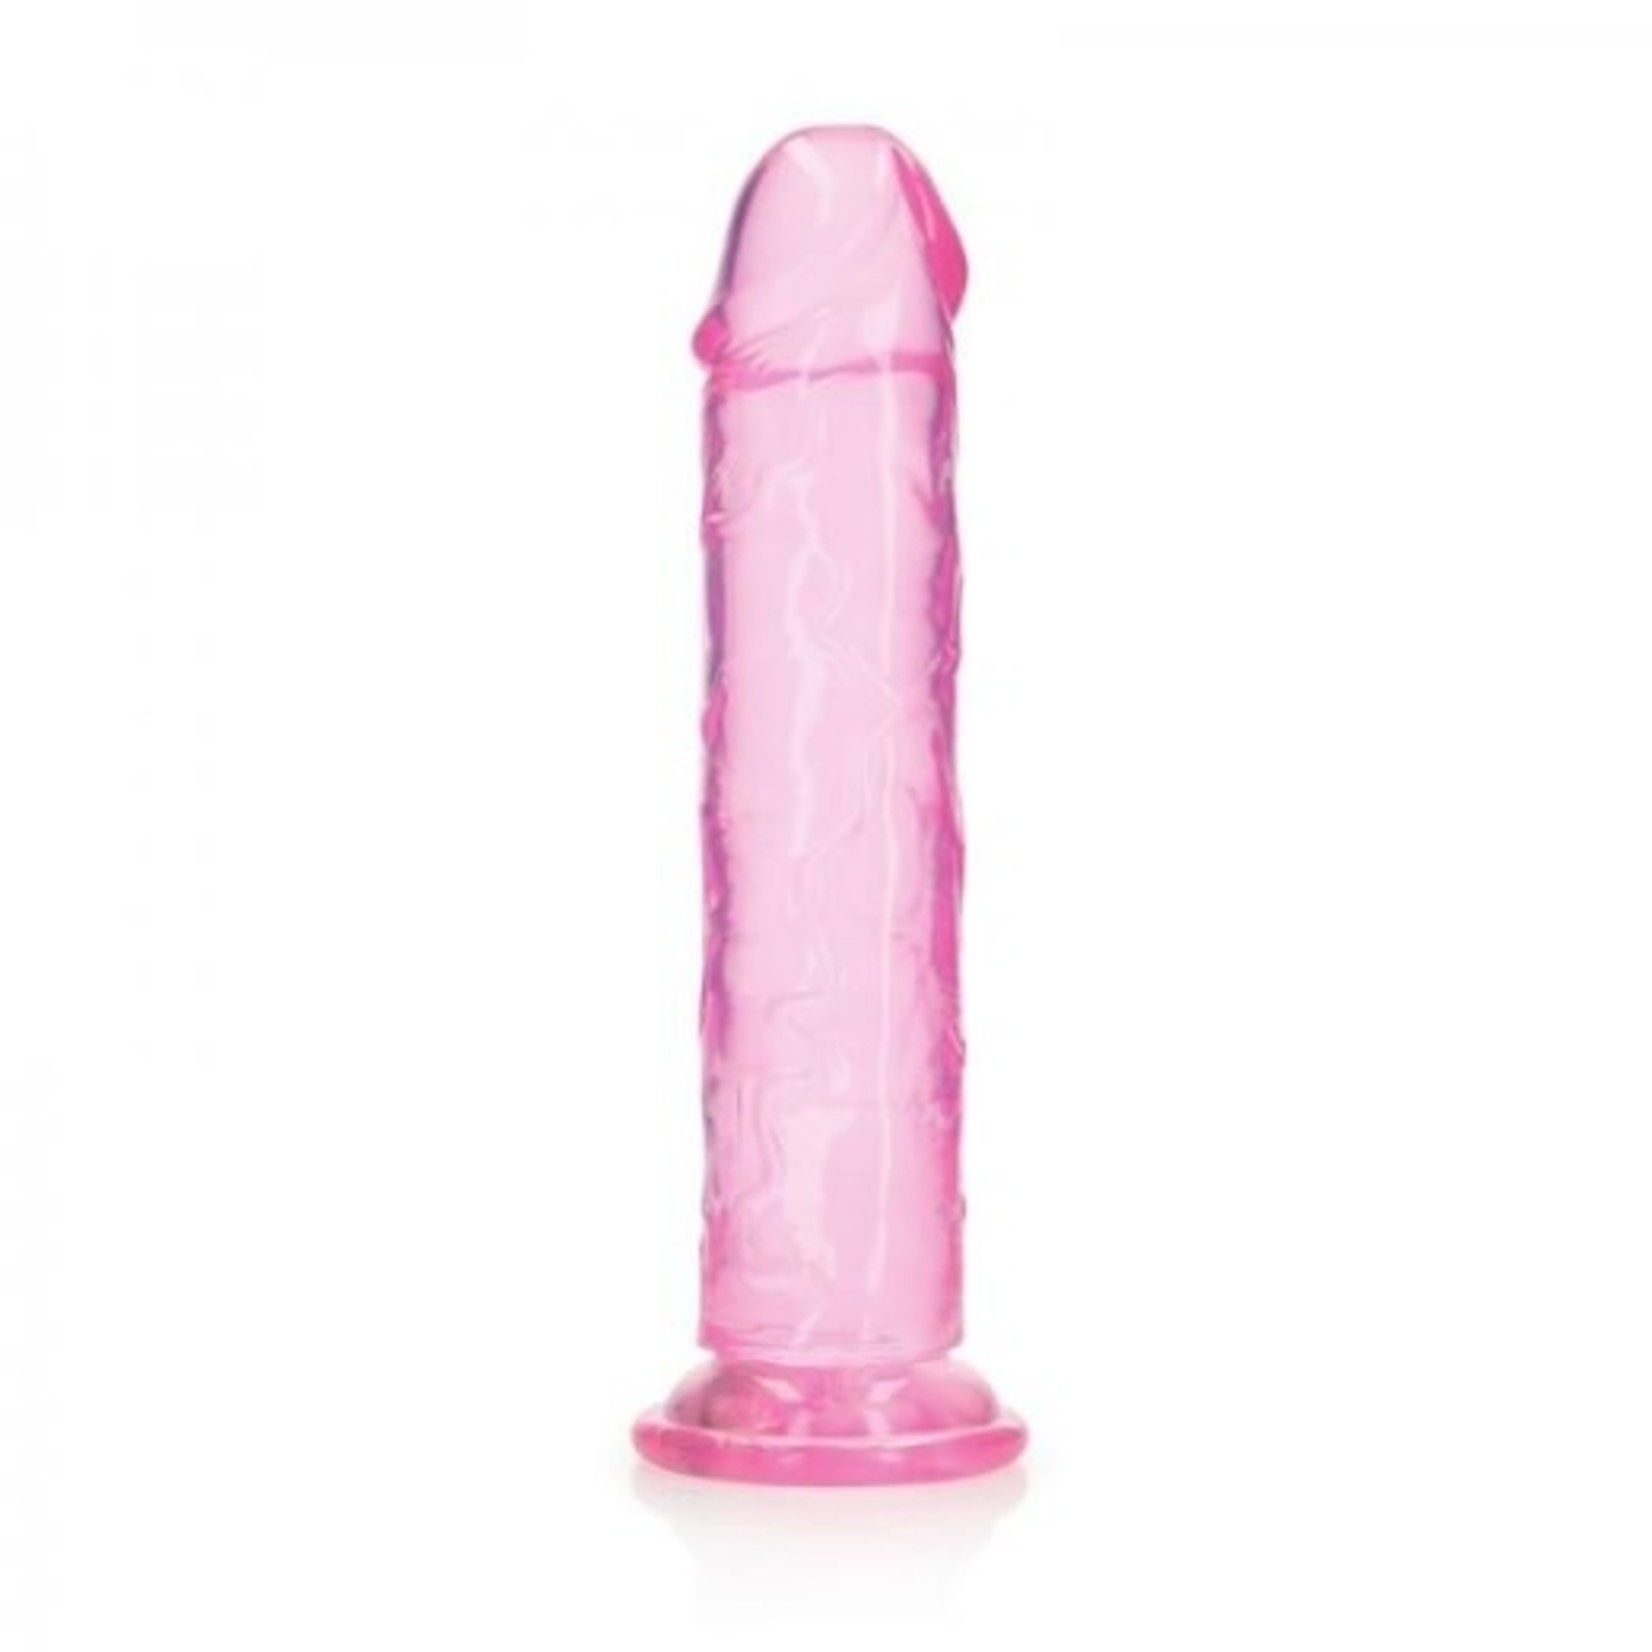 SHOTS REALROCK CRYSTAL CLEAR JELLY 11 INCH DILDO